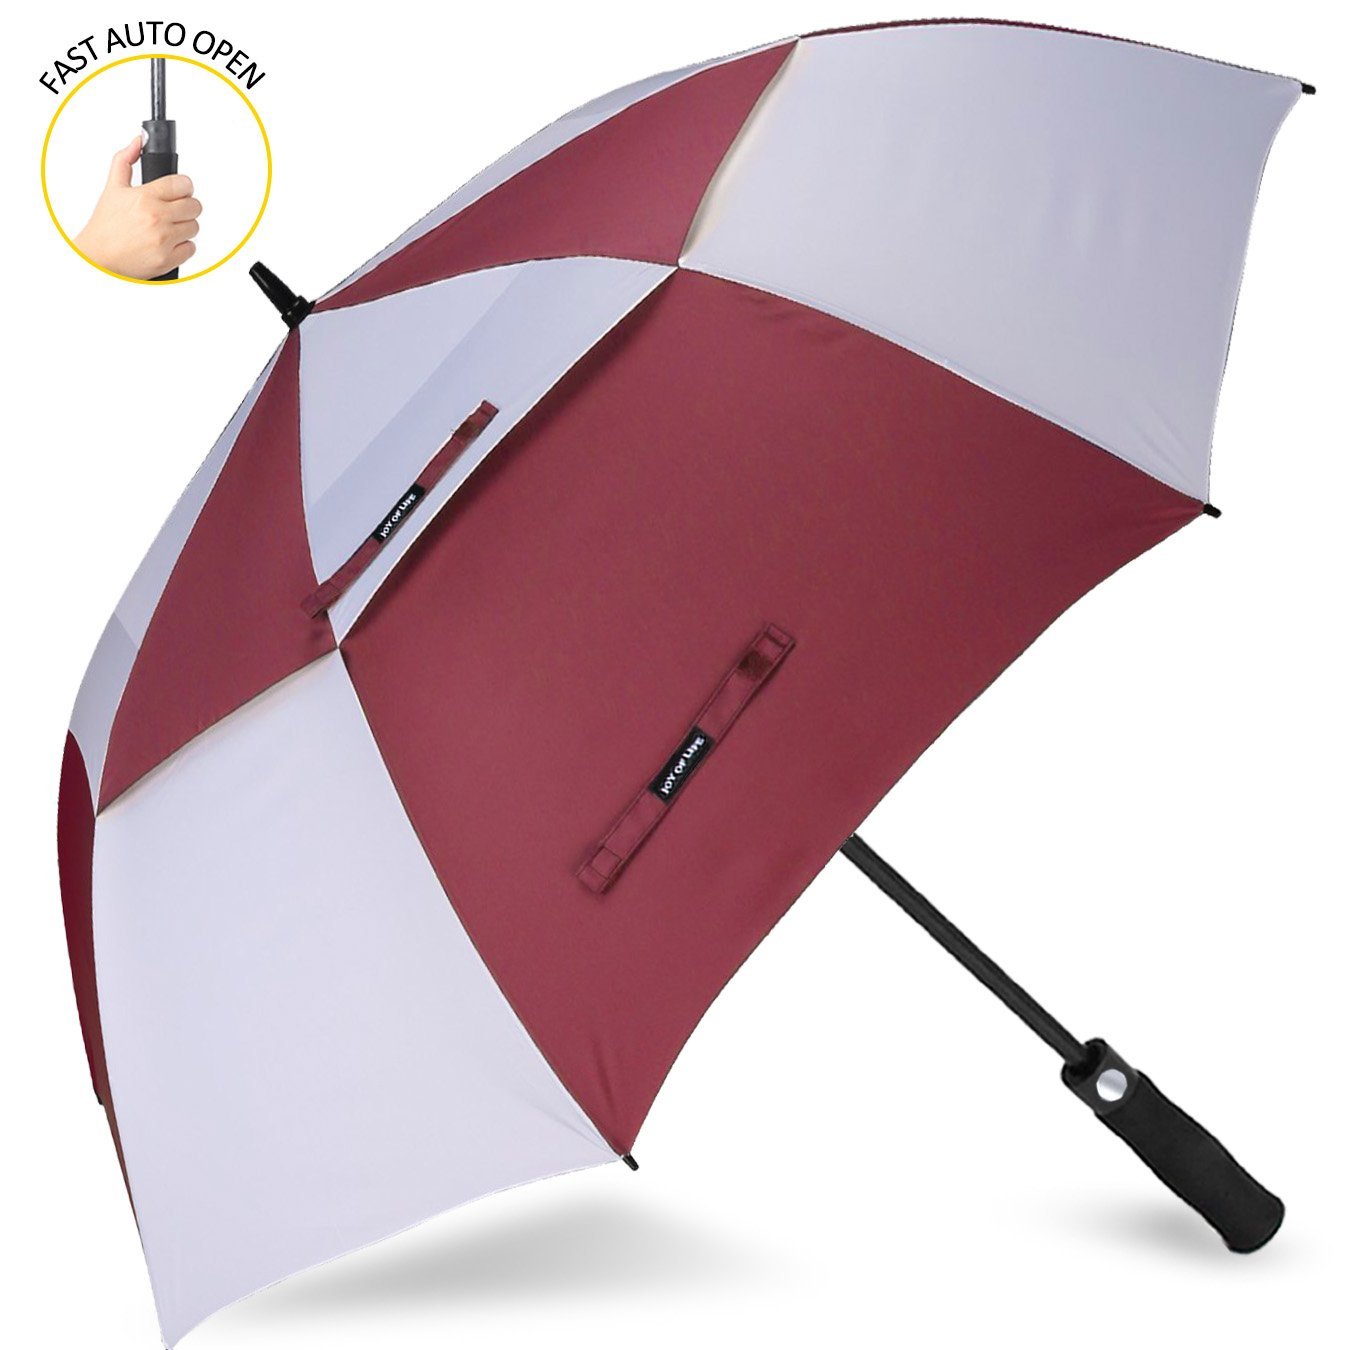 Zomake 62 / 68 Inch Automatic Open Windproof Double Canopy Golf Umbrellas